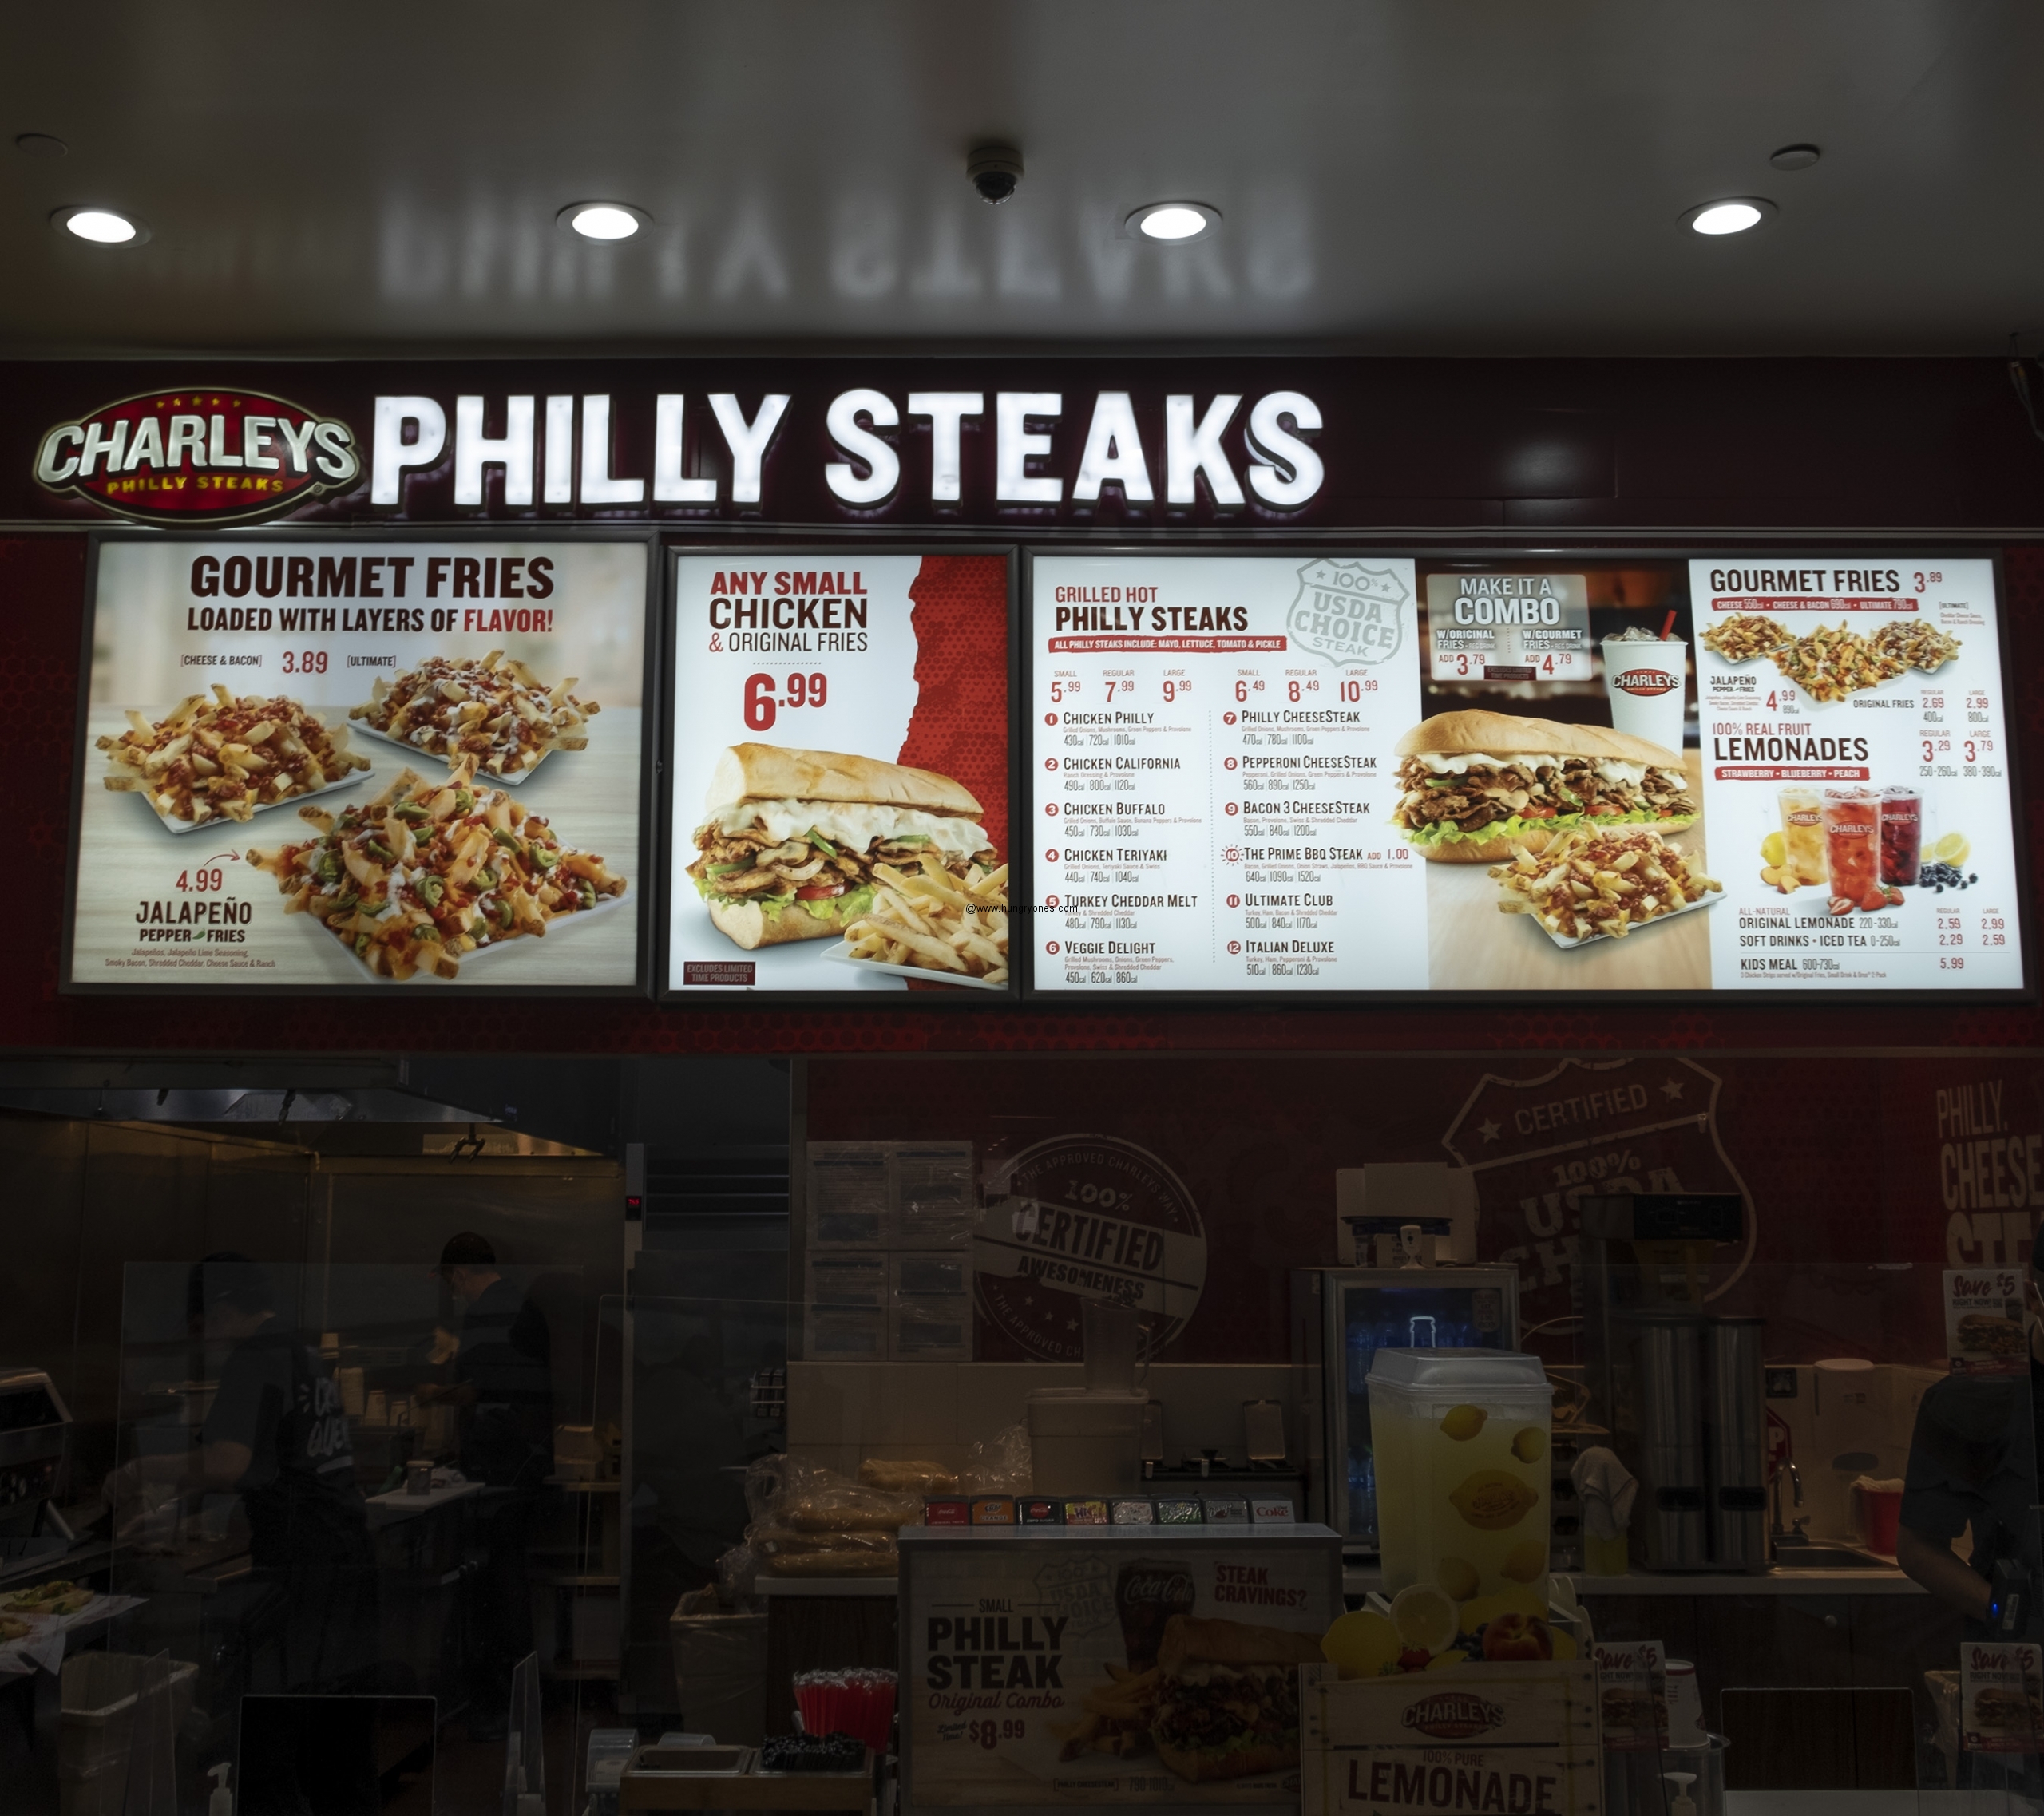 Charley's Philly steaks at fashion valley mall in San Diego, California -  BizBuySell